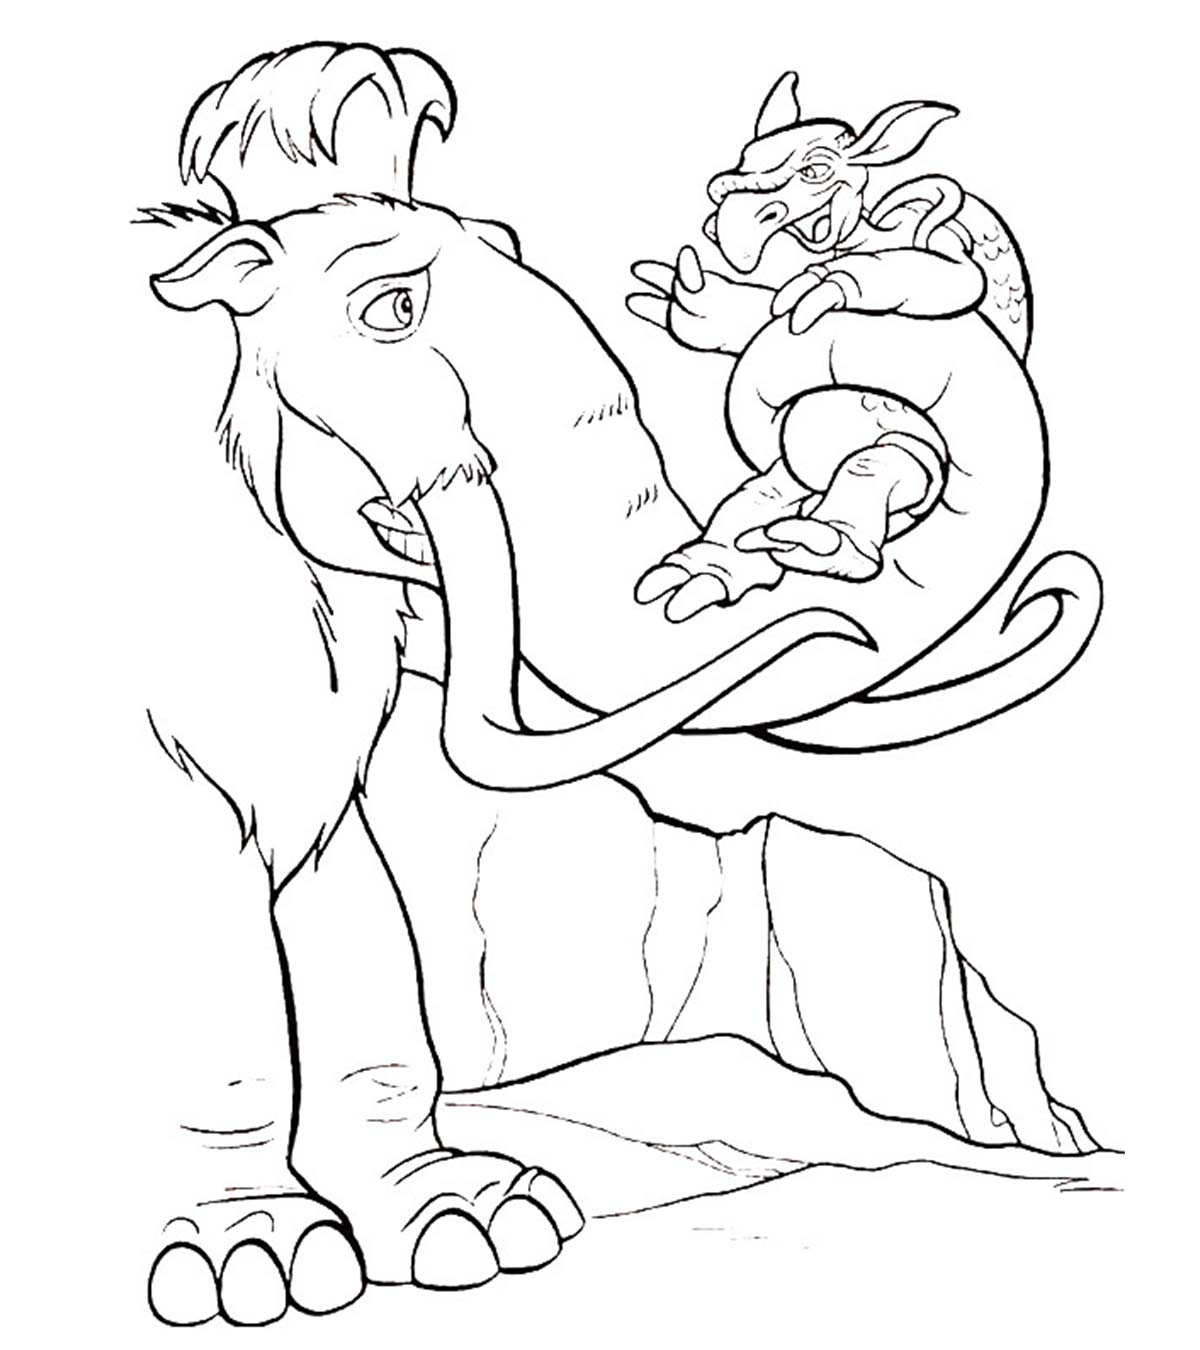 10 Cute Ice Age Coloring Pages For Your Toddler